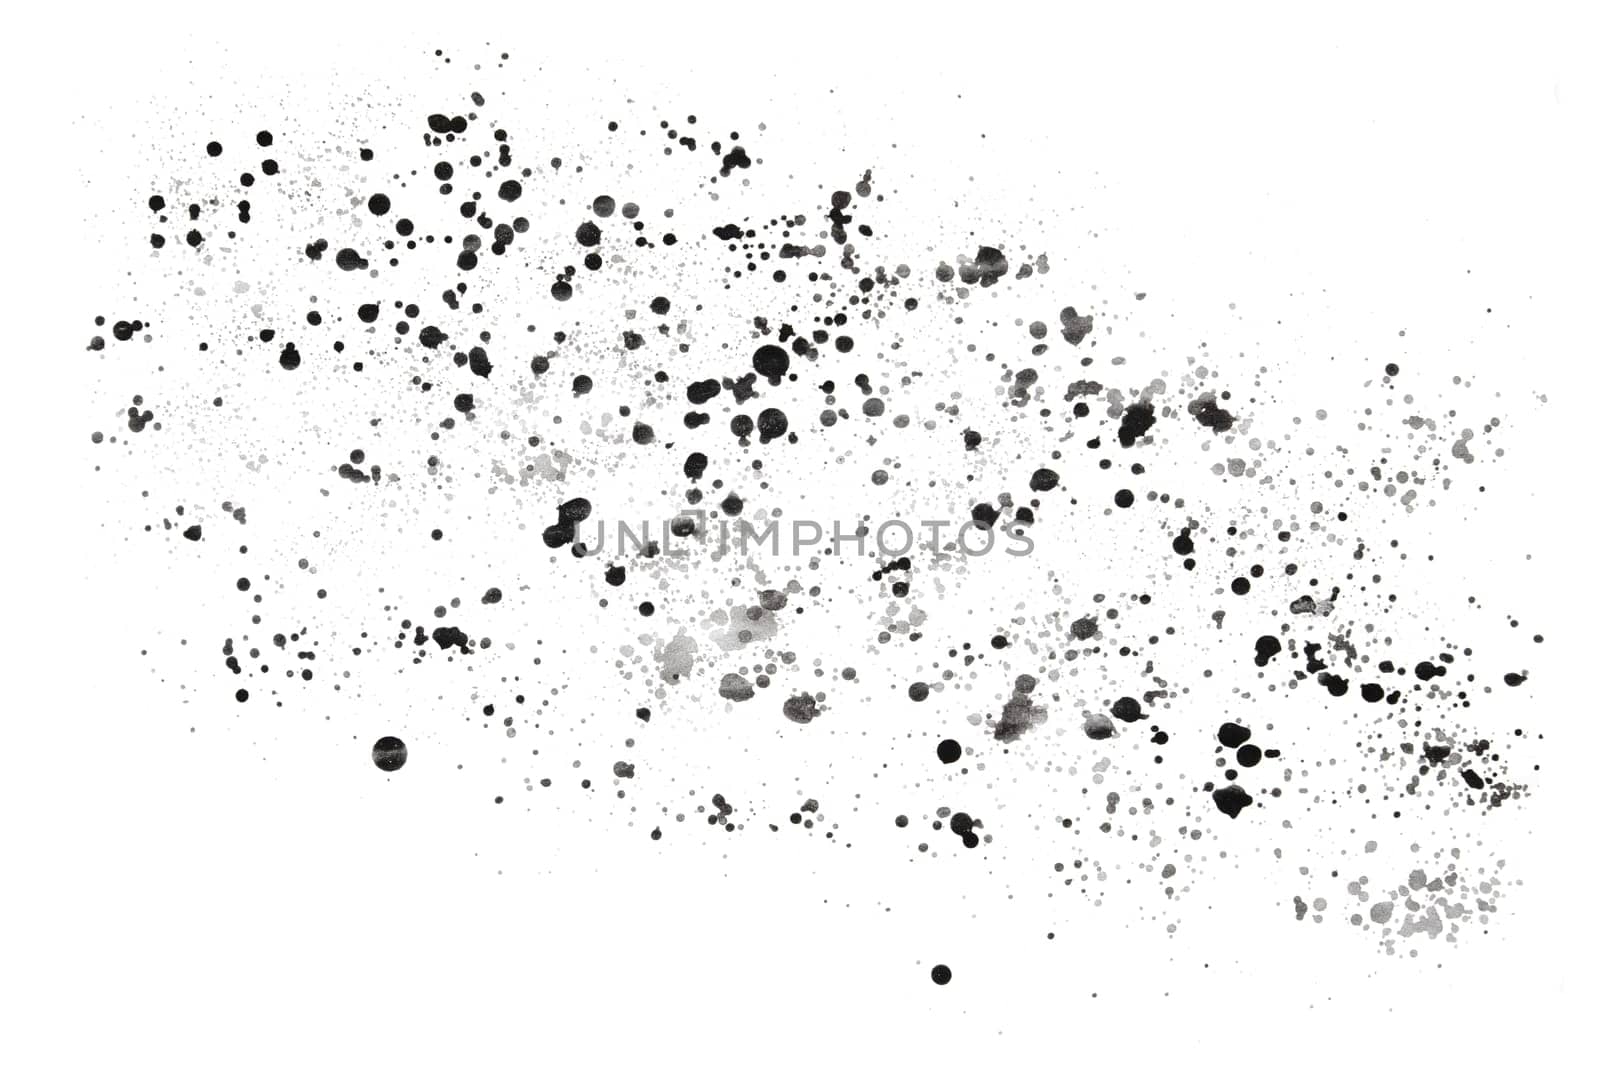 Splatter of black paint isolated on a white background. Stock photo.